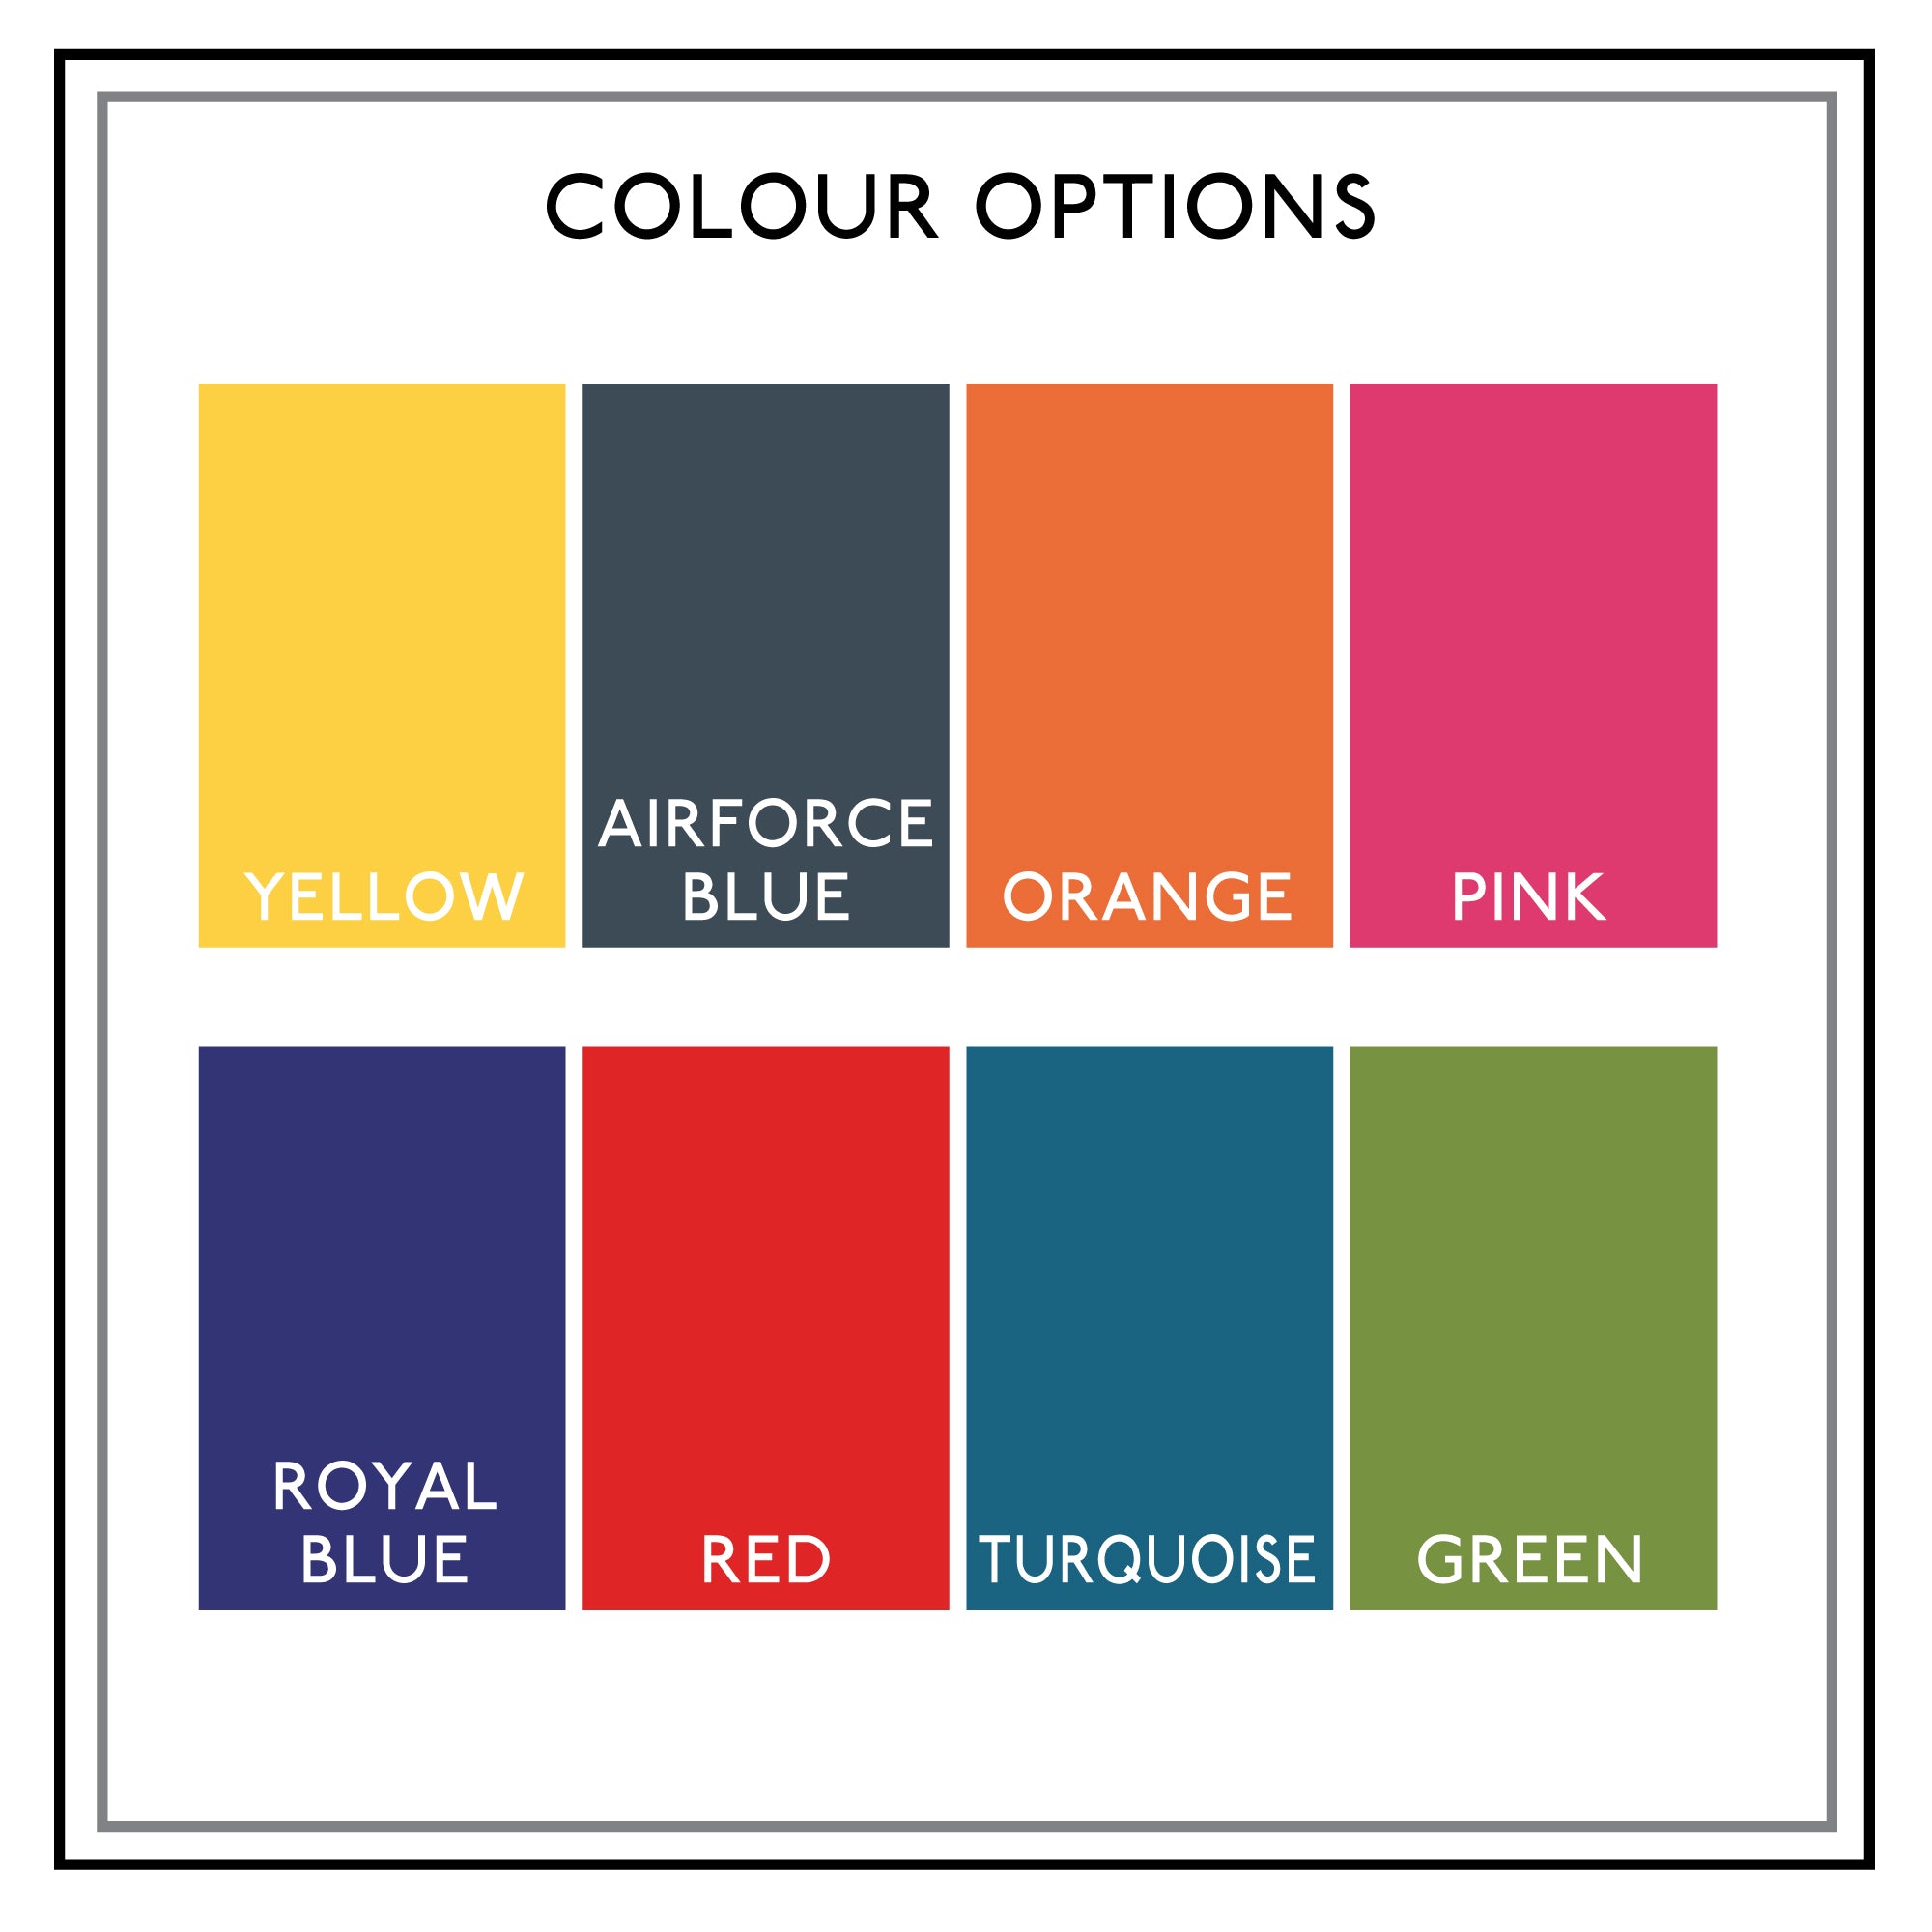 Colour chart showing passport colours available , yellow, airforce blue, orange, pink, royal blue,red,turquoise and green